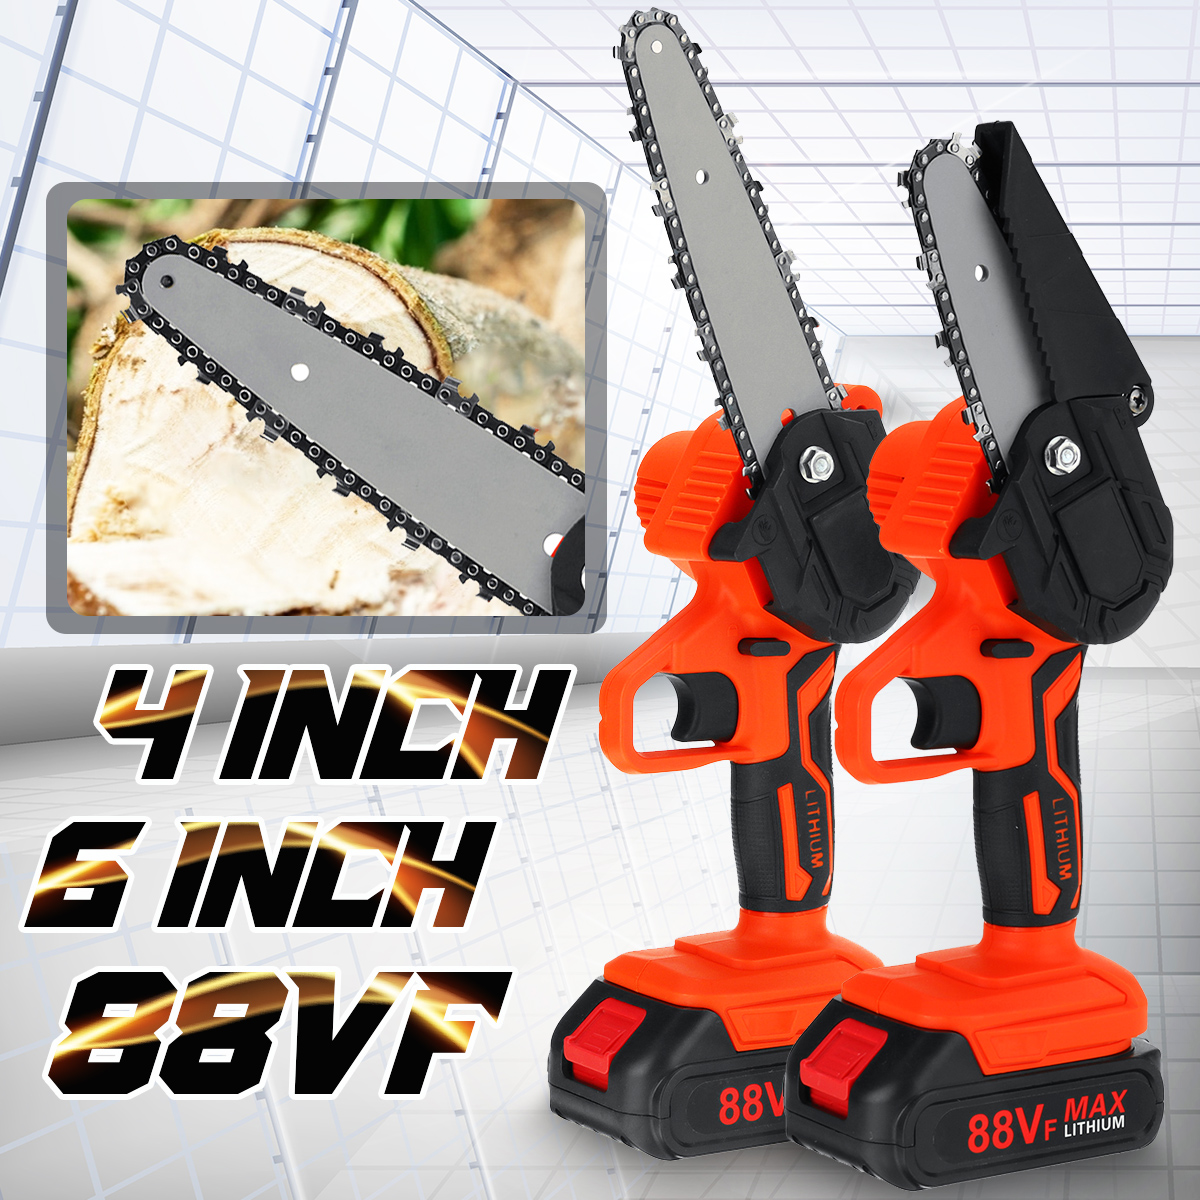 88VF-4Inch-6Inch-Cordless-Electric-Chain-Saw-One-Hand-Mini-Saw-Wood-Cutter-Woodworking-Tool-W-12-Bat-1870556-2